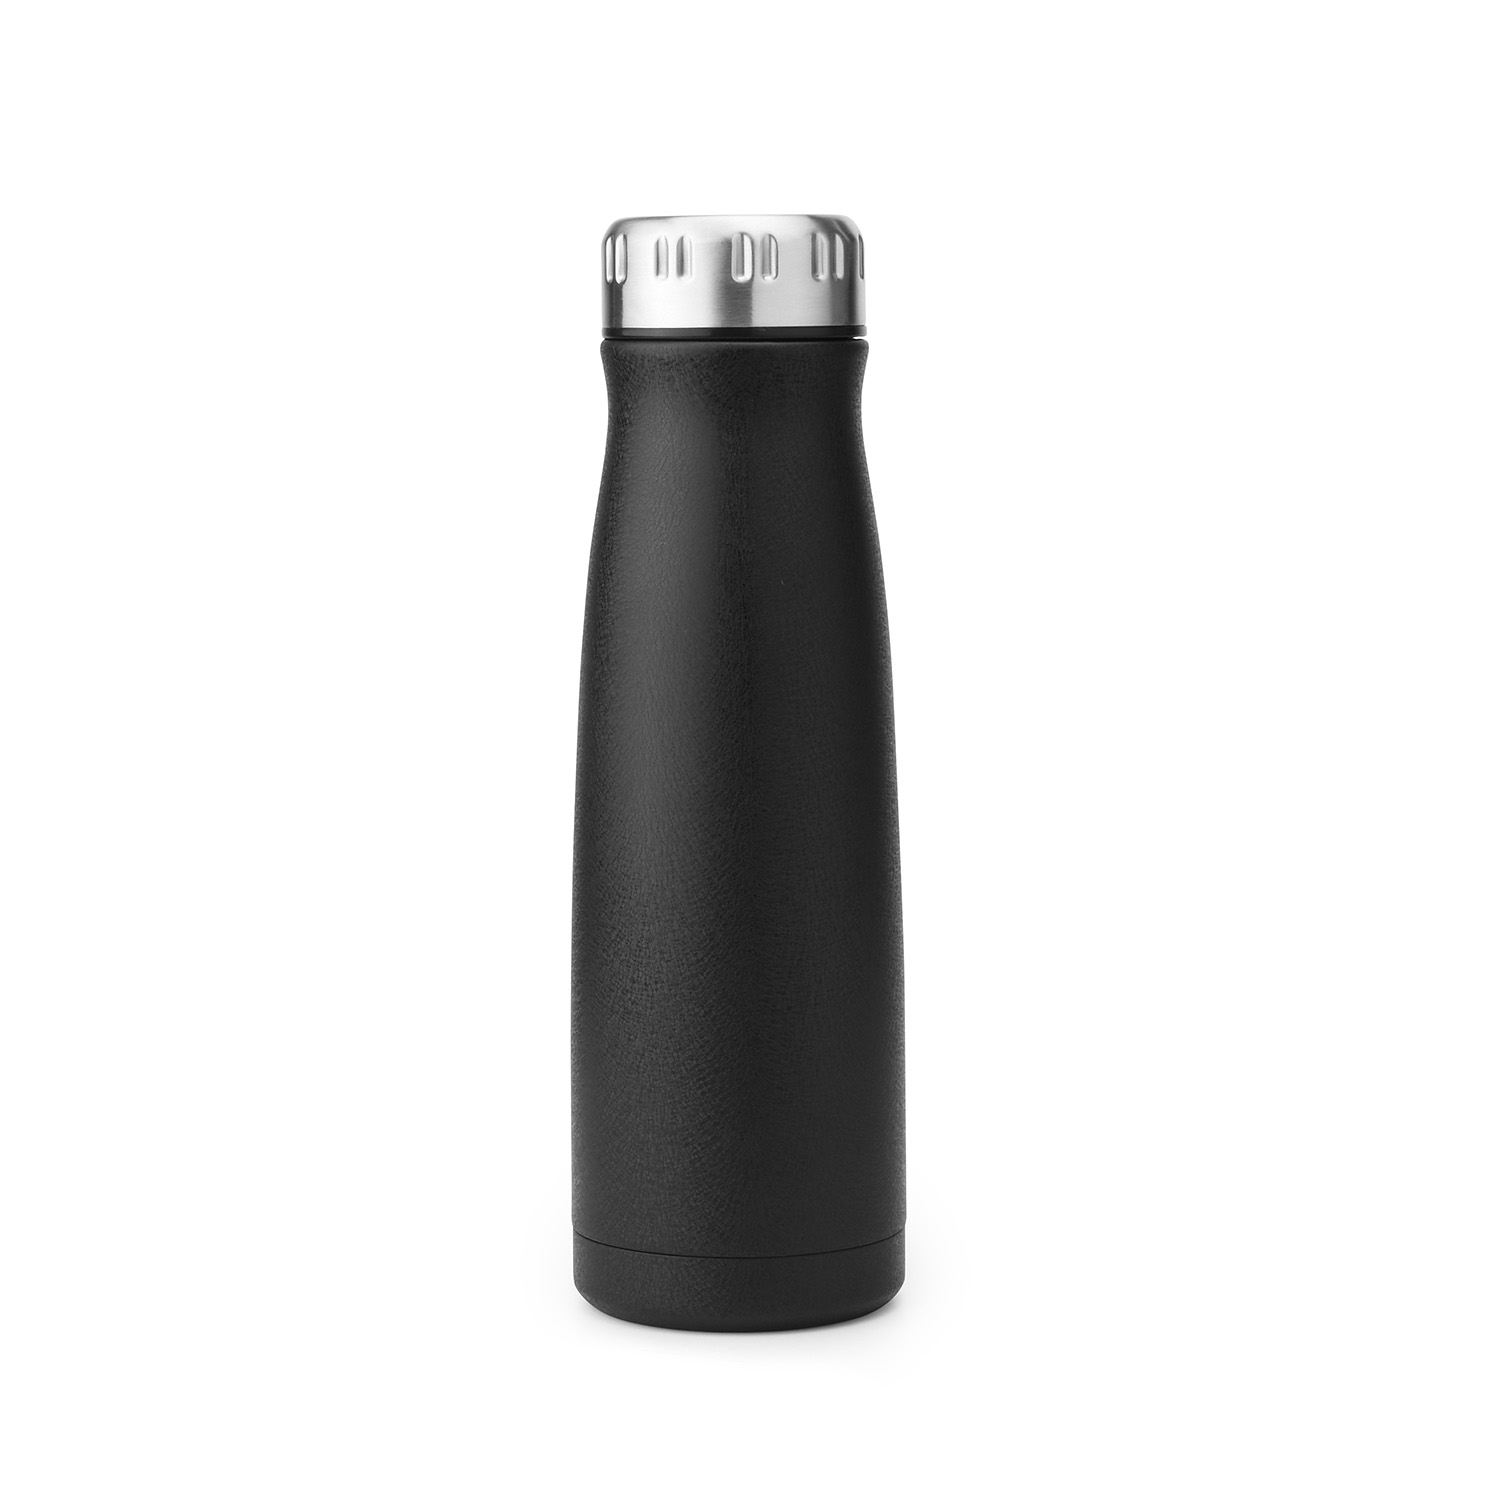 https://www.waterbottle.tech/wp-content/uploads/2019/08/thermos-stainless-steel-cola-shaped-water-bottle-s12500a3-1.jpg